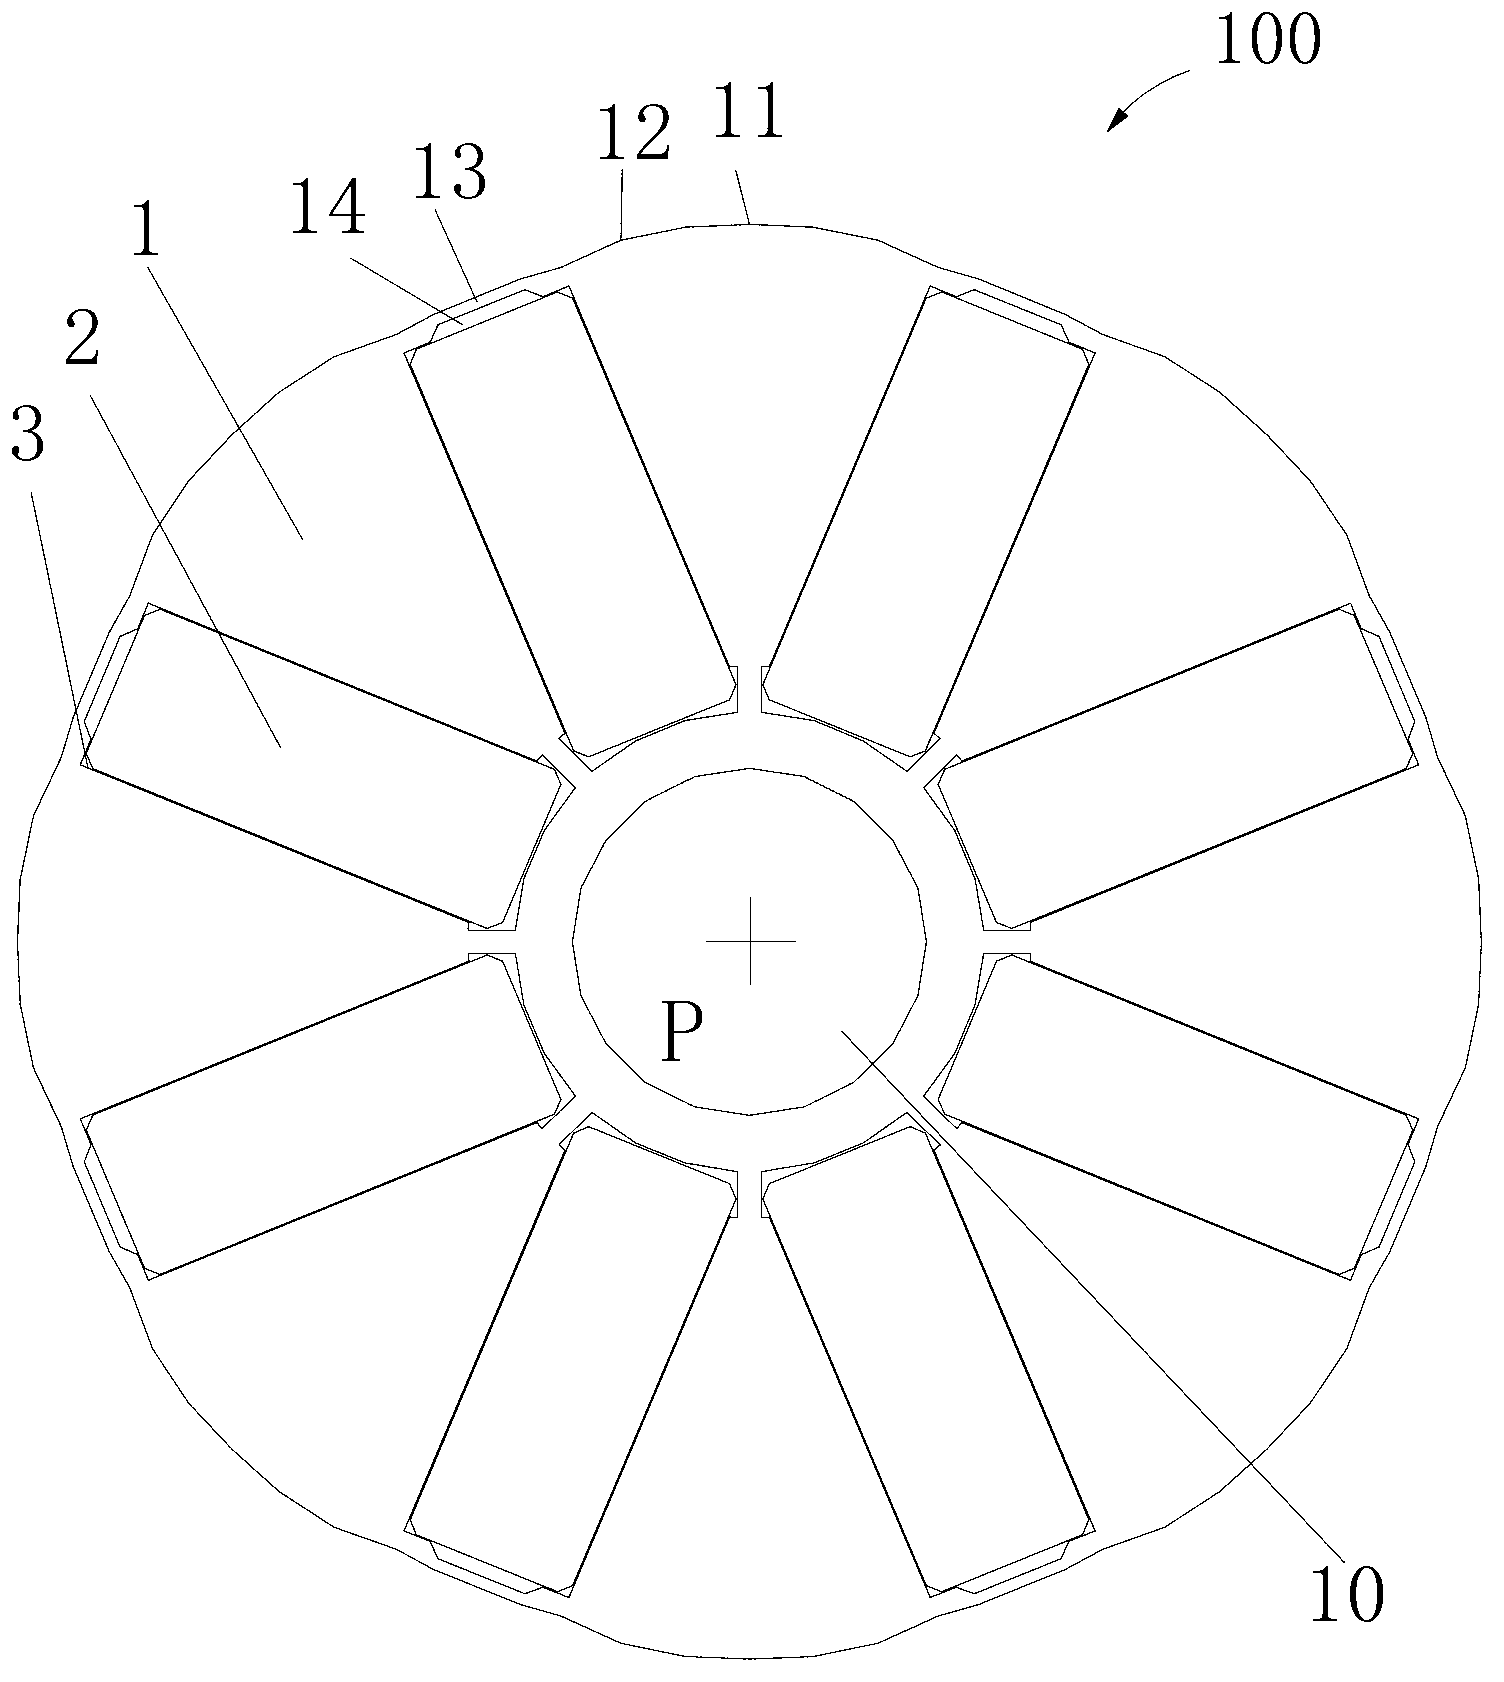 Rotor of permanent magnet motor